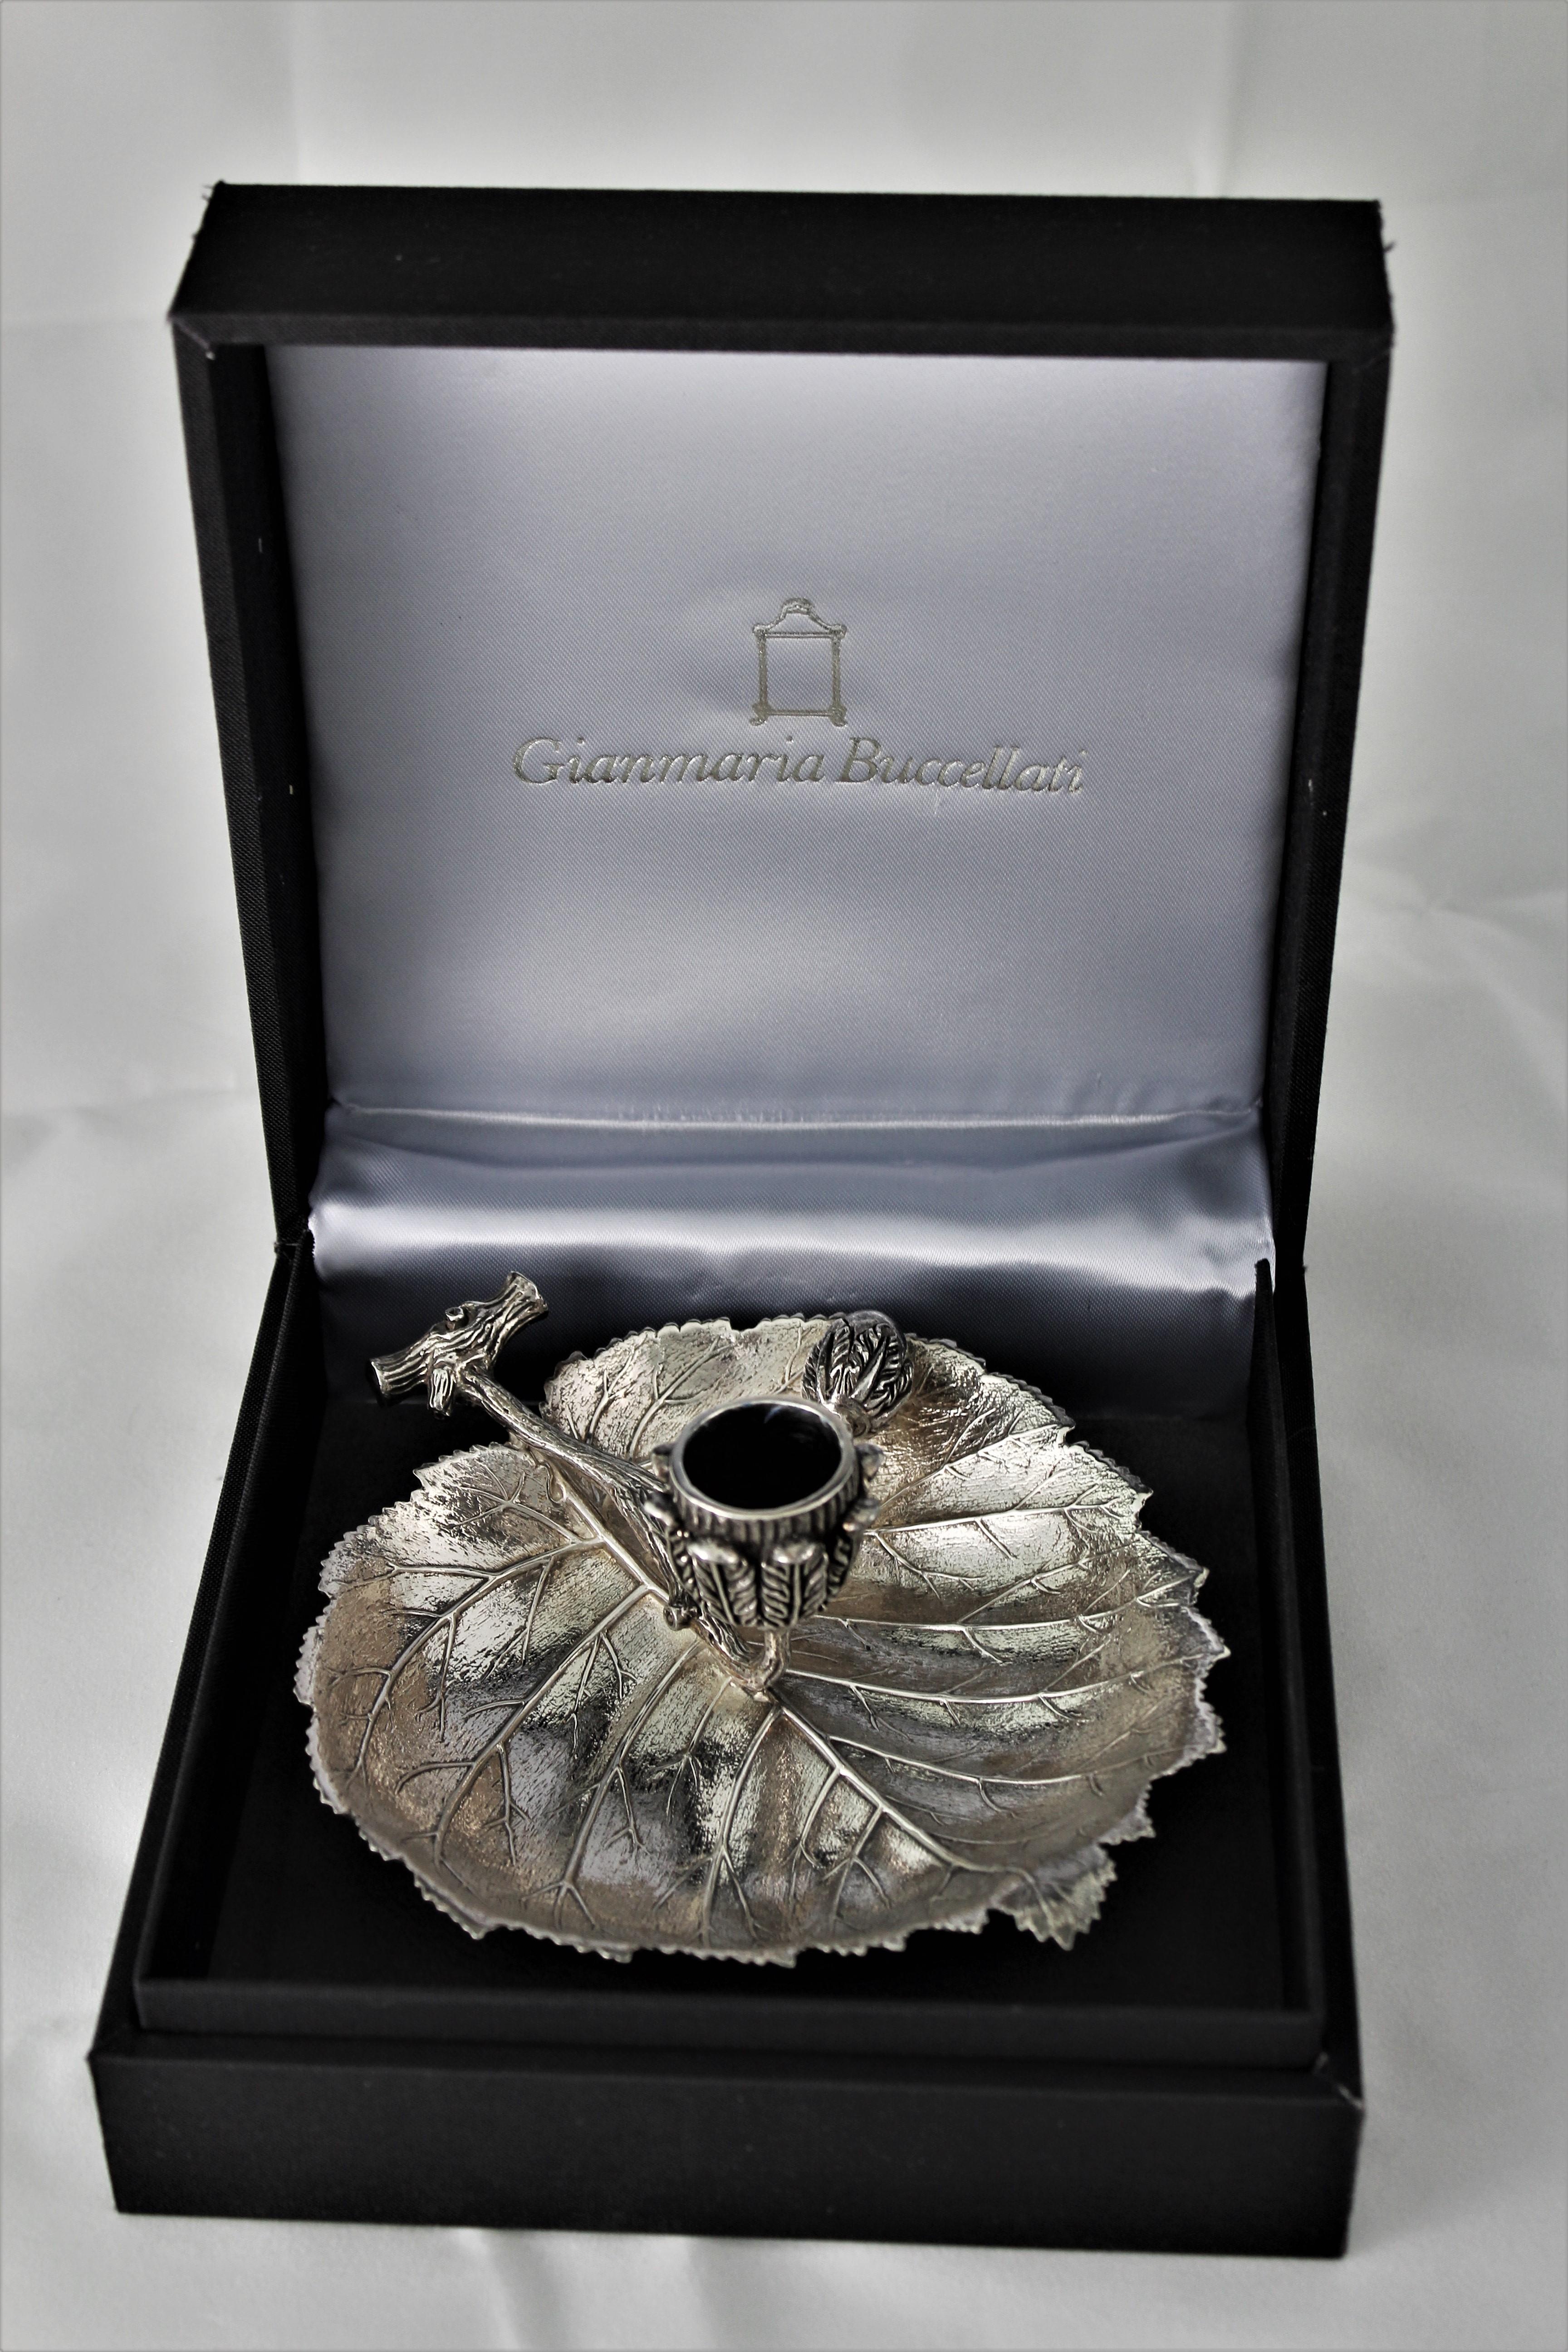 20th Century Gianmaria Buccellati Engraved Sterling Silver Candleholder In Excellent Condition For Sale In Florence, IT